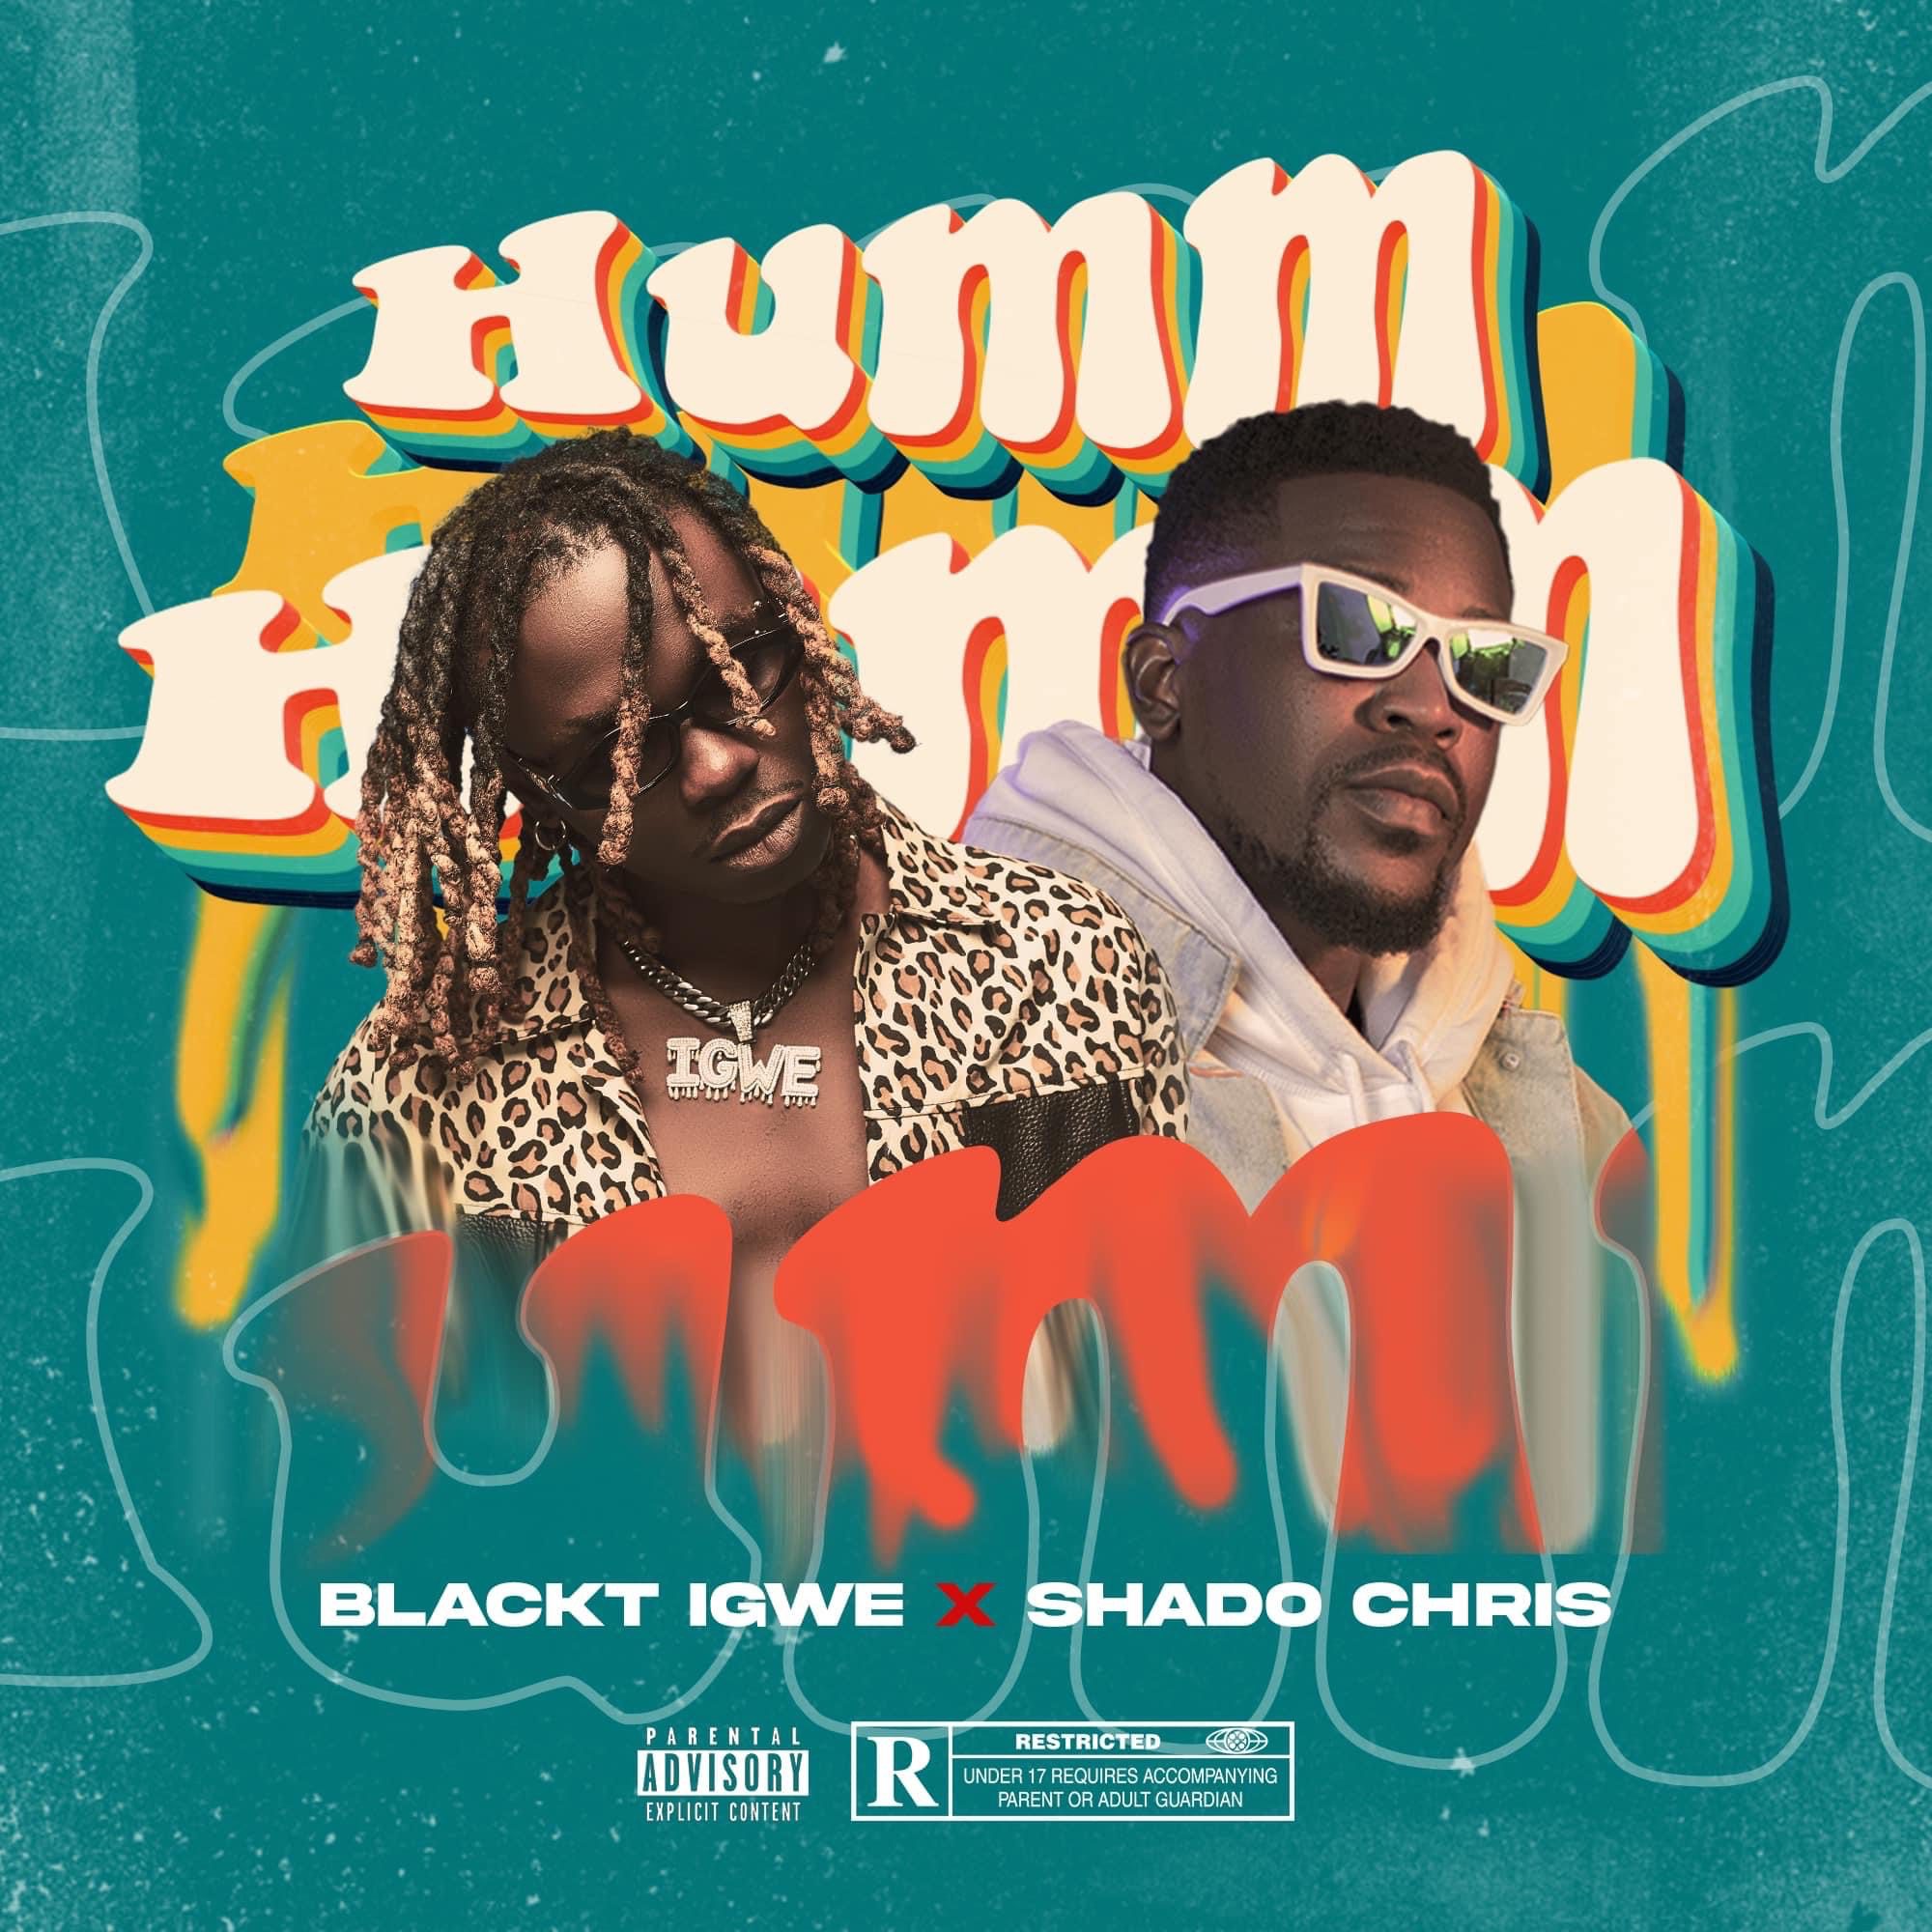 BlackT Igwe And Shado Chris Battle It Out On New Single “Humm Humm”.”